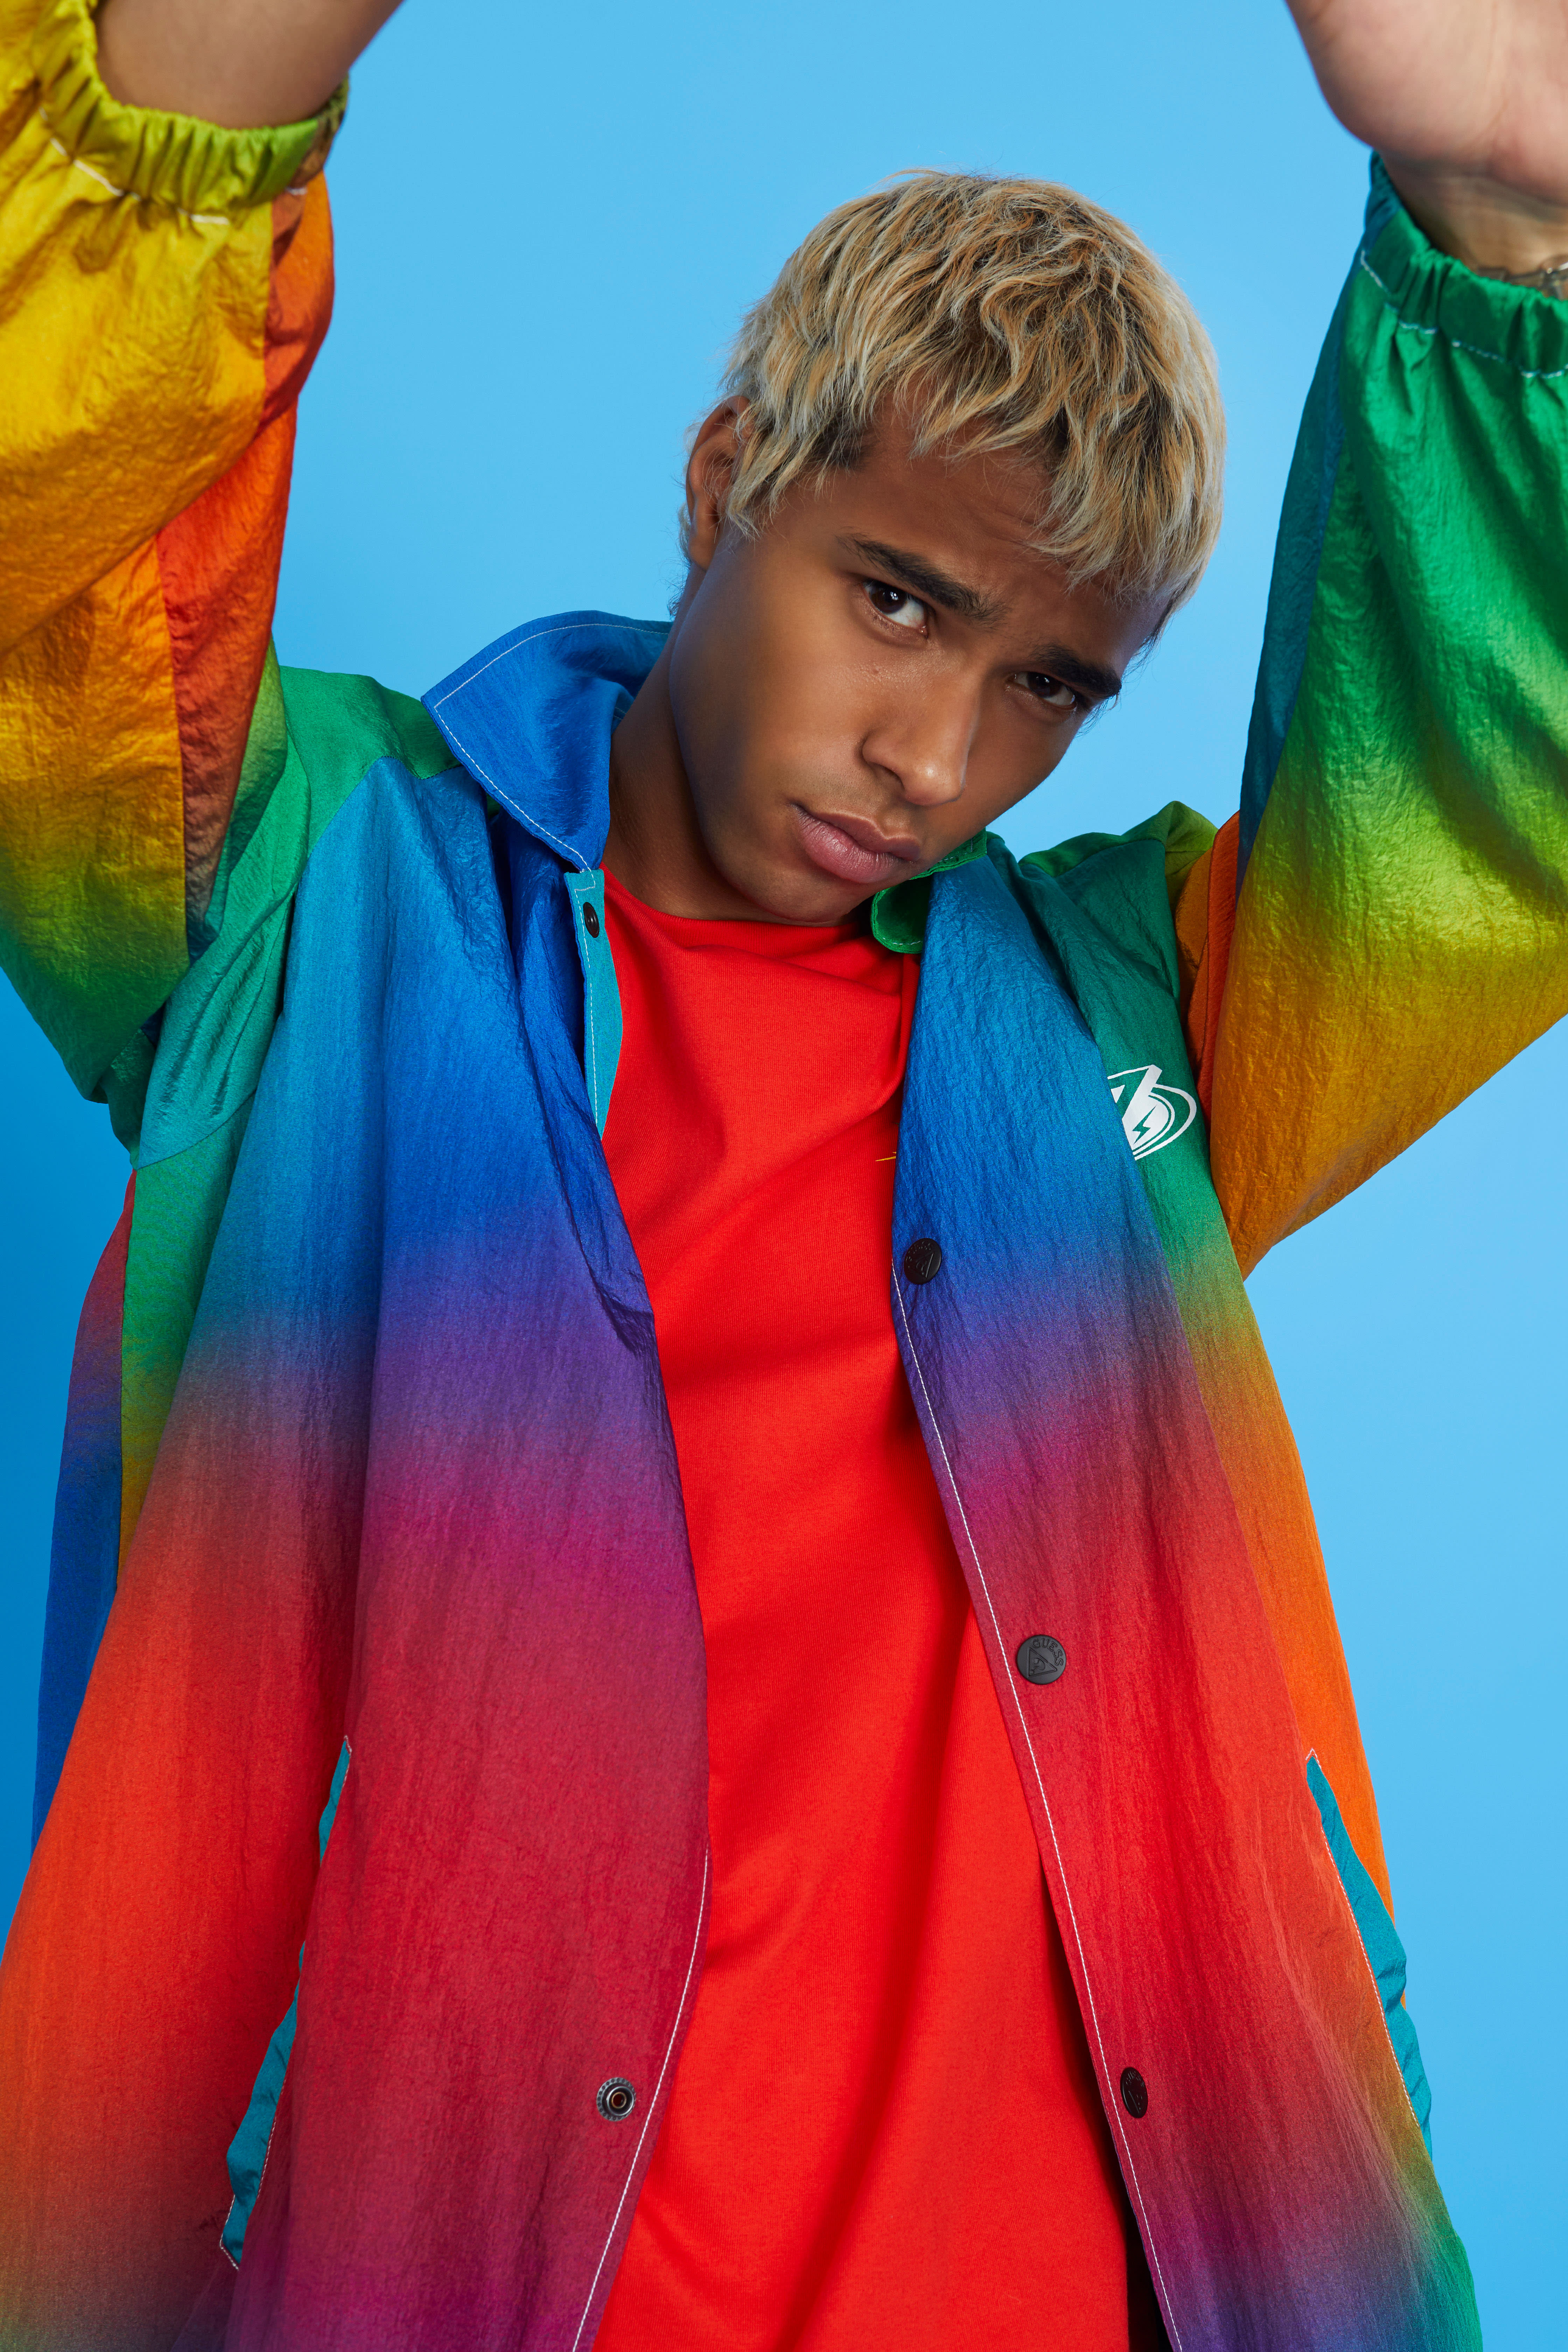 J Balvin & GUESS Share Behind-the-Scenes Look at 'Colores' 2020  Collection Campaign